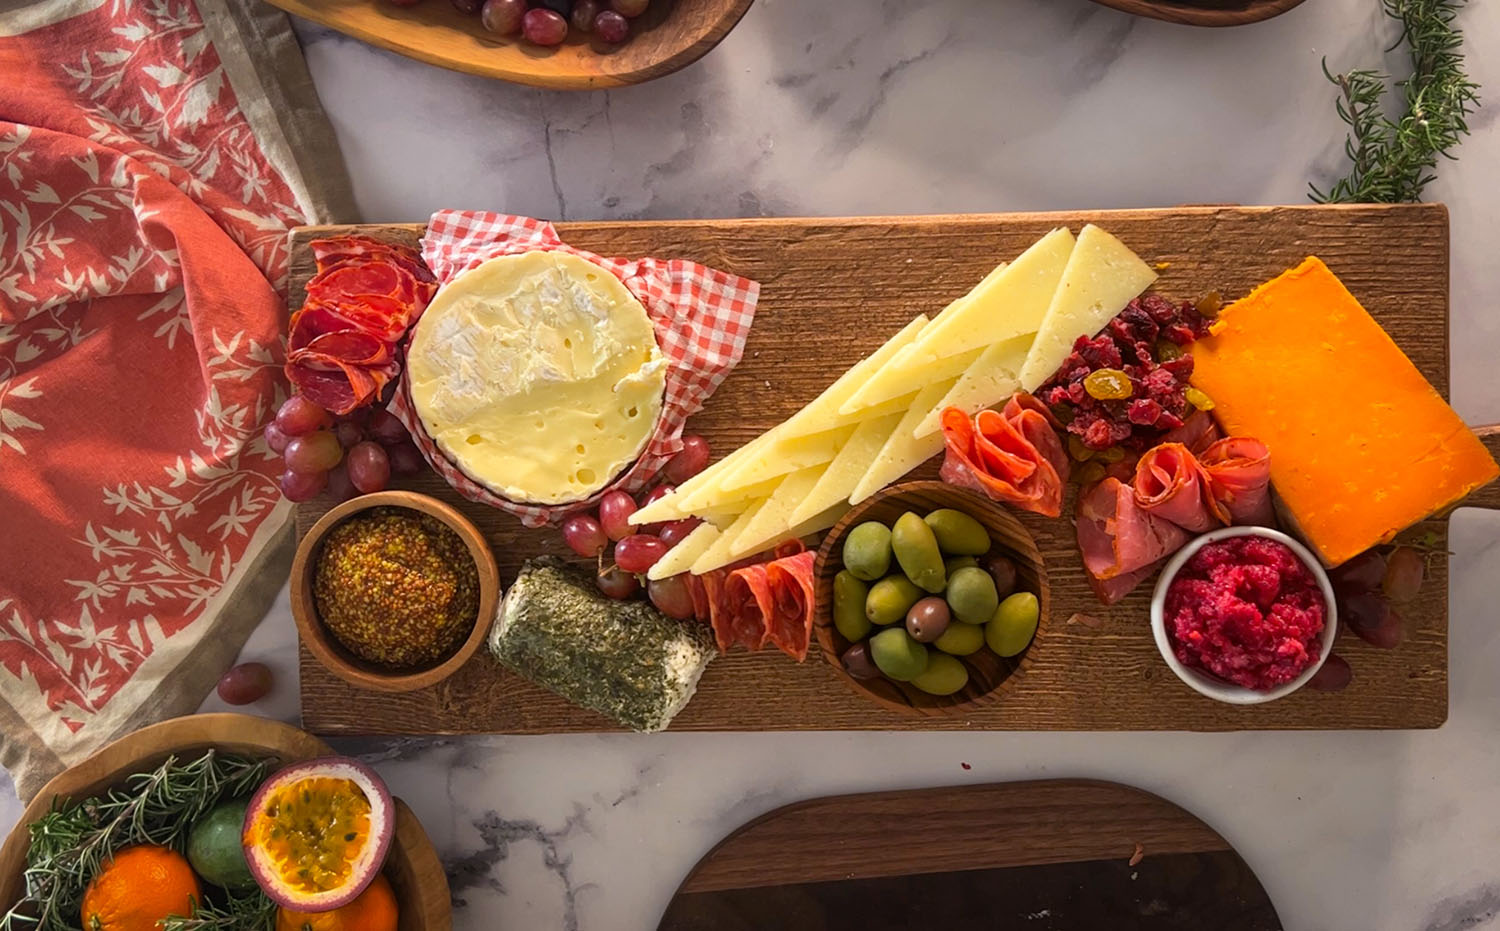 Charcuterie board with dips, olives, grapes, cheeses, and folded meats